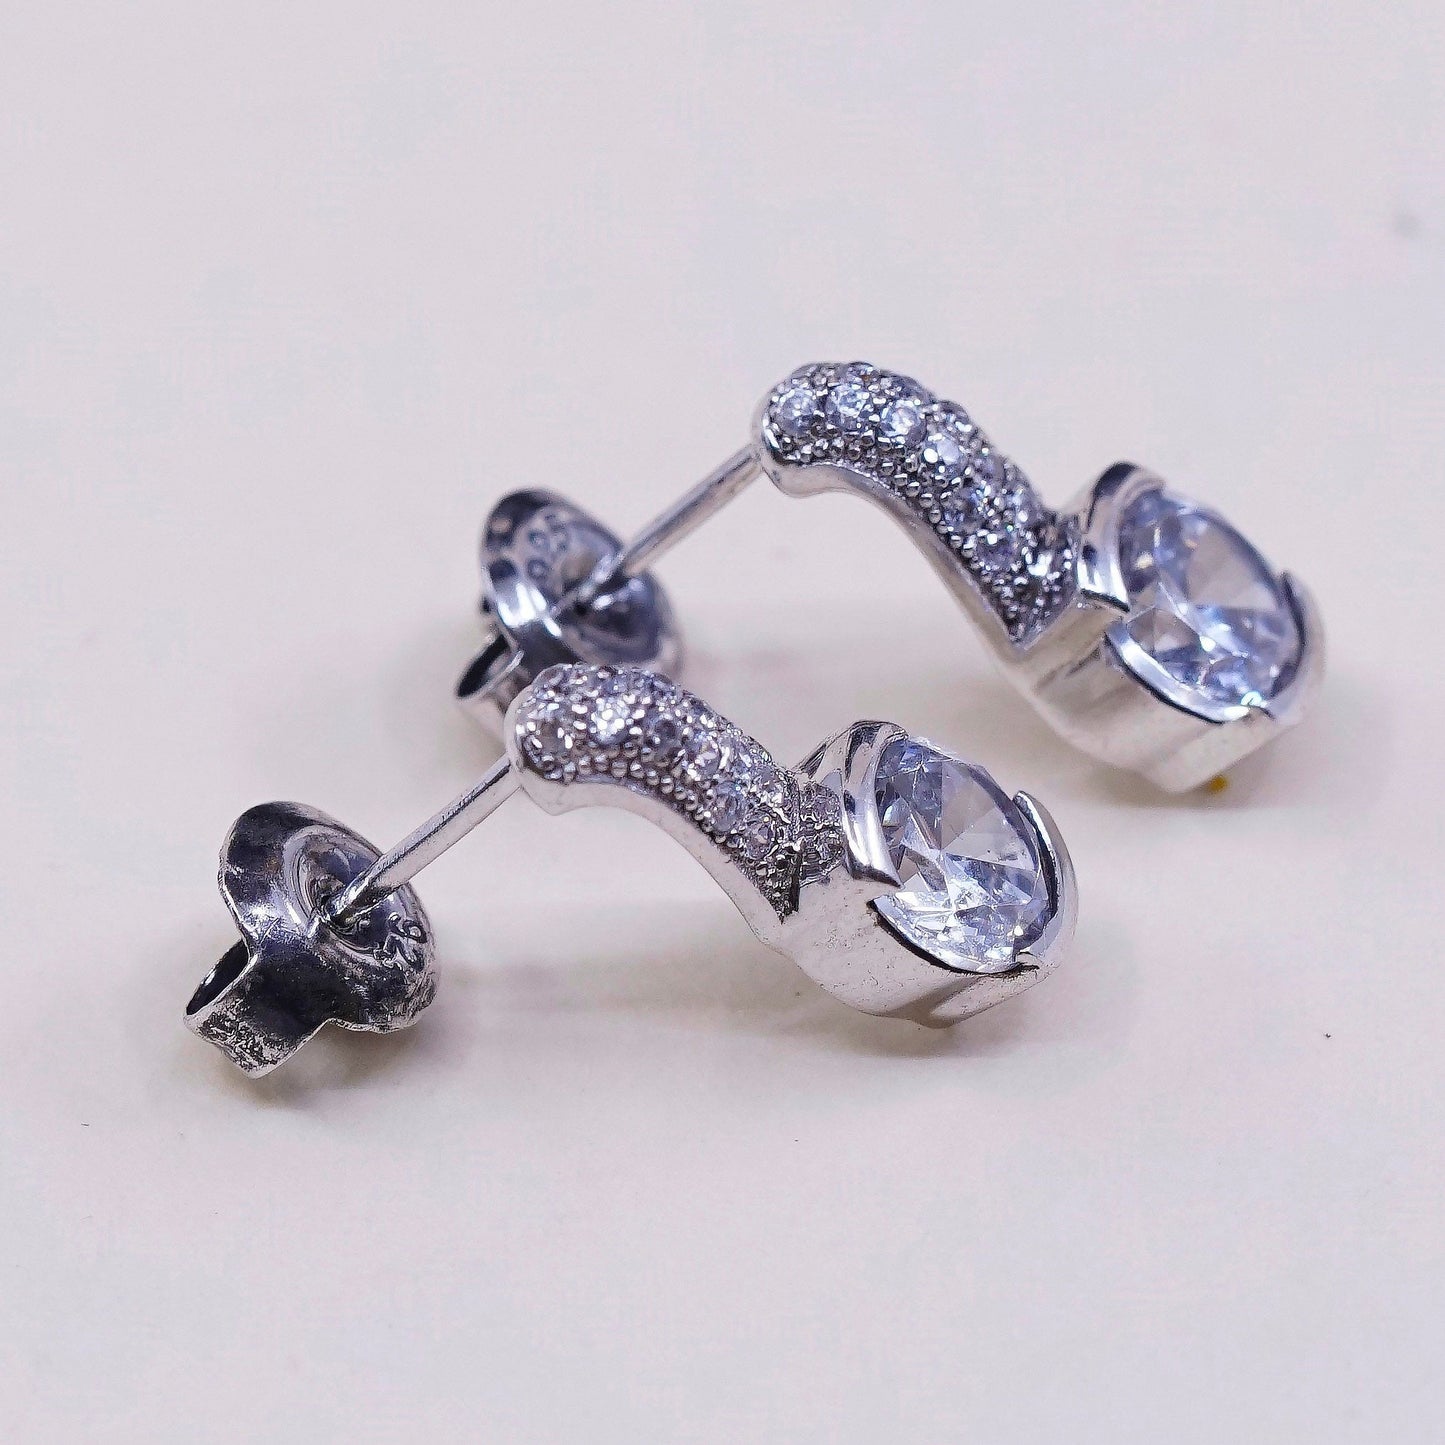 vtg sterling silver cz studs, fashion minimalist earrings, stamped 925, signed